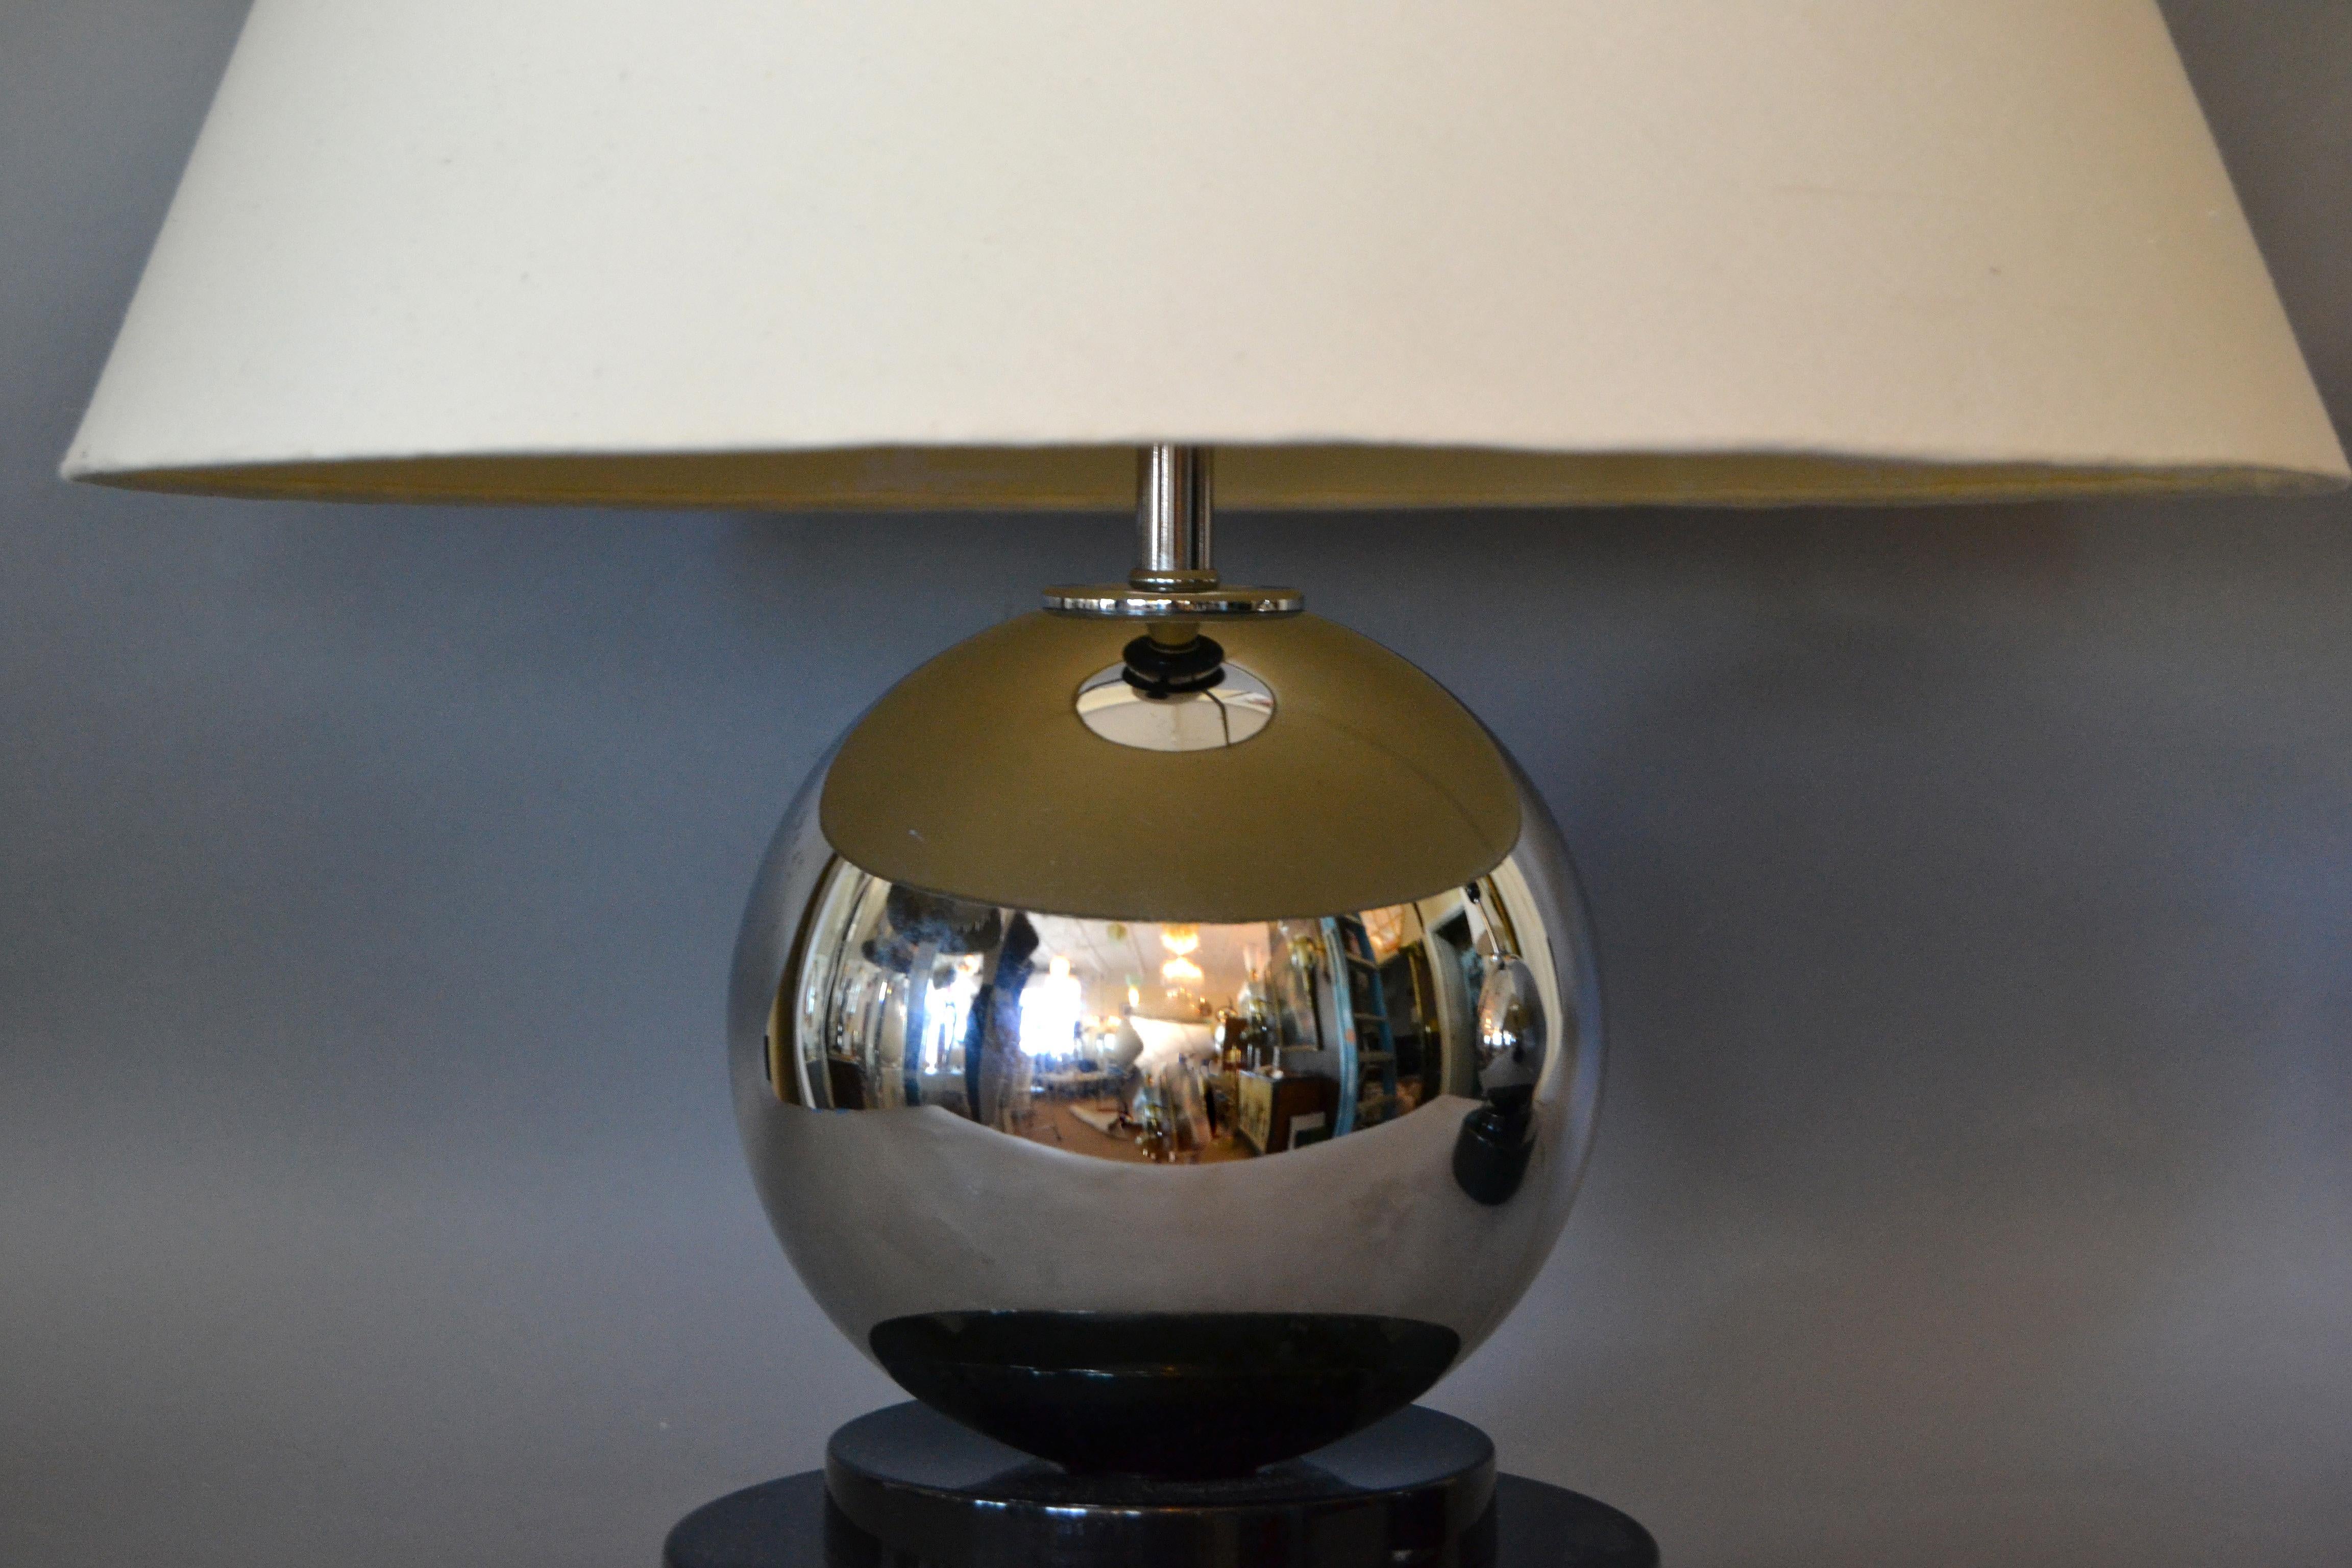 A pair of modern van teal chrome ball table lamps mounted on a black metal base.
In perfect working condition and each uses a max. 150 watts 3 way light bulb.
Note: No Shades; they will look stunning with cylindrical white linen hardback shades.